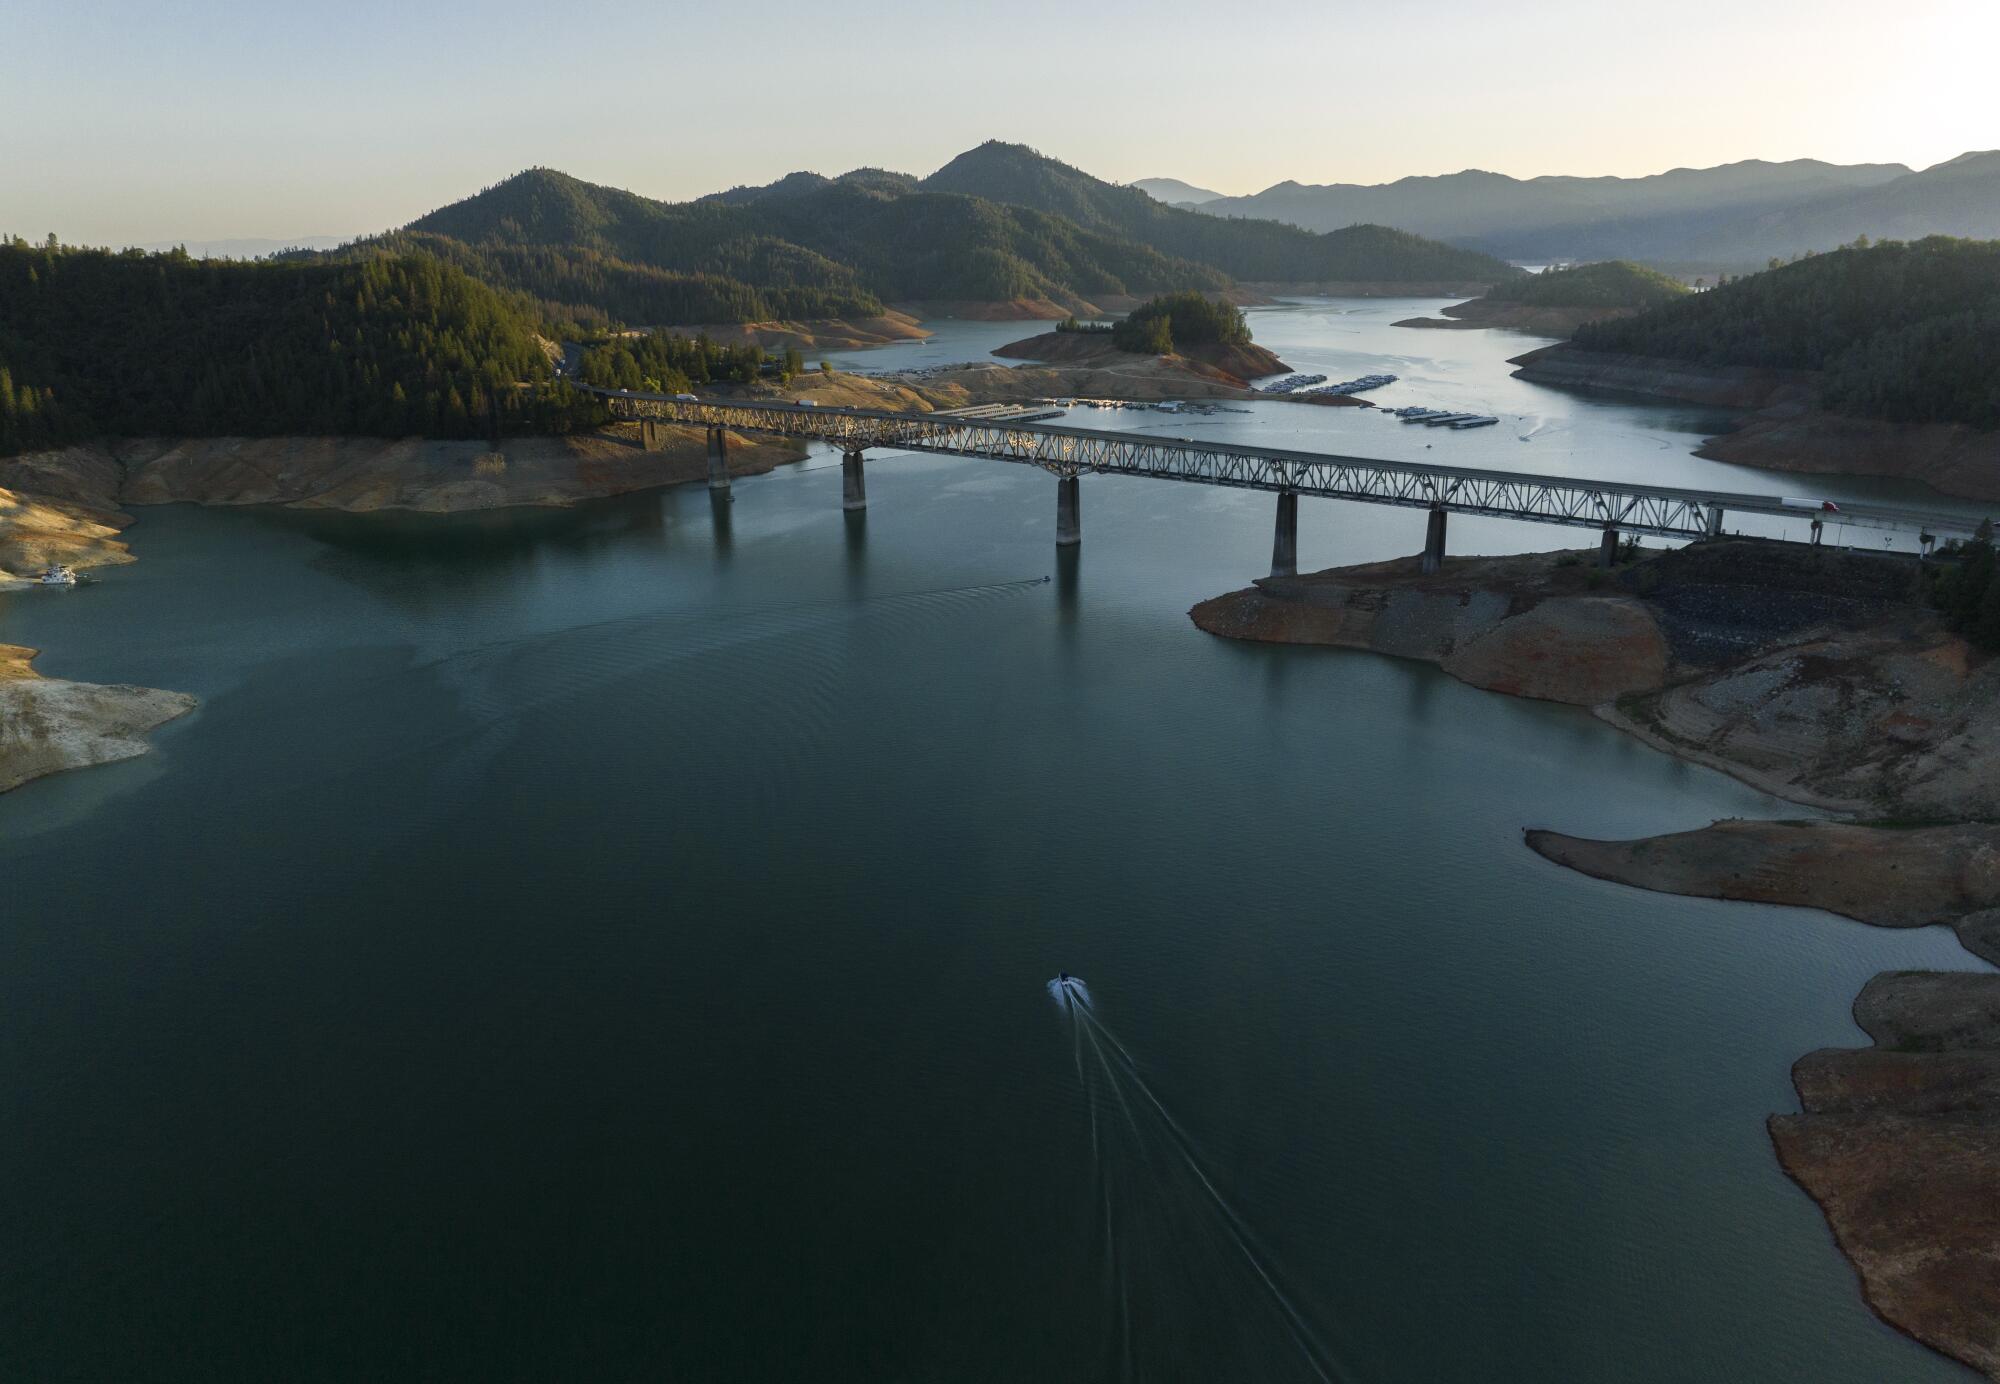 The Pit River Bridge spans Shasta Lake, now at only 38% capacity.